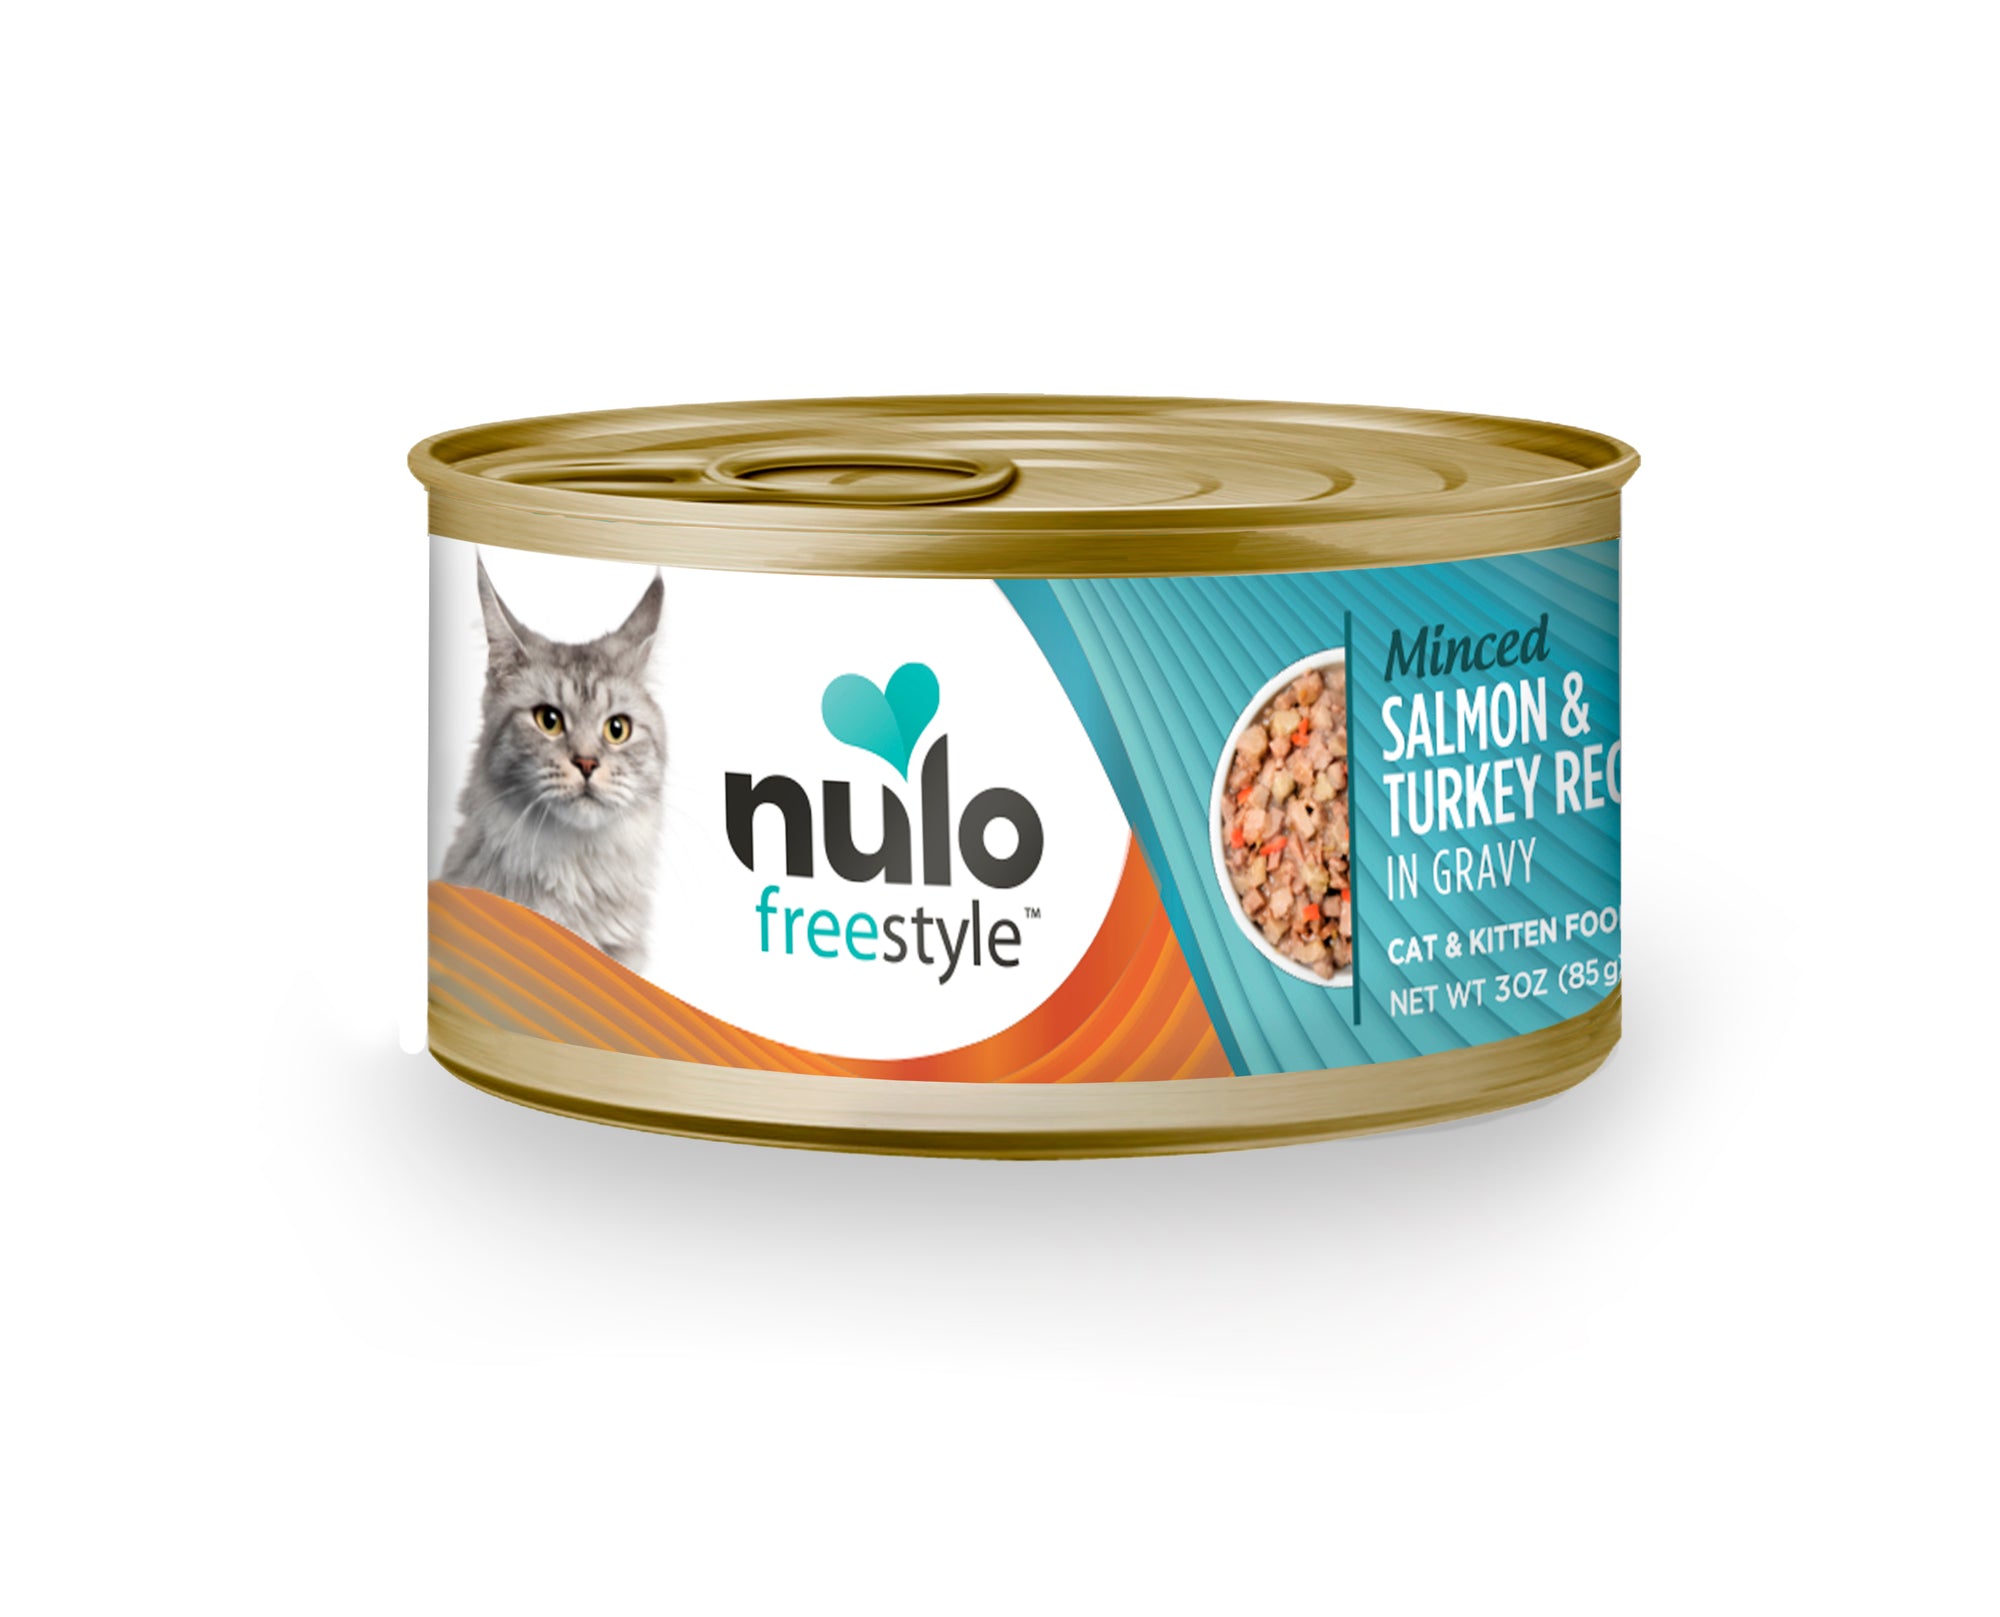 Nulo Freestyle Minced Salmon & Turkey recipe in gravy for Cats